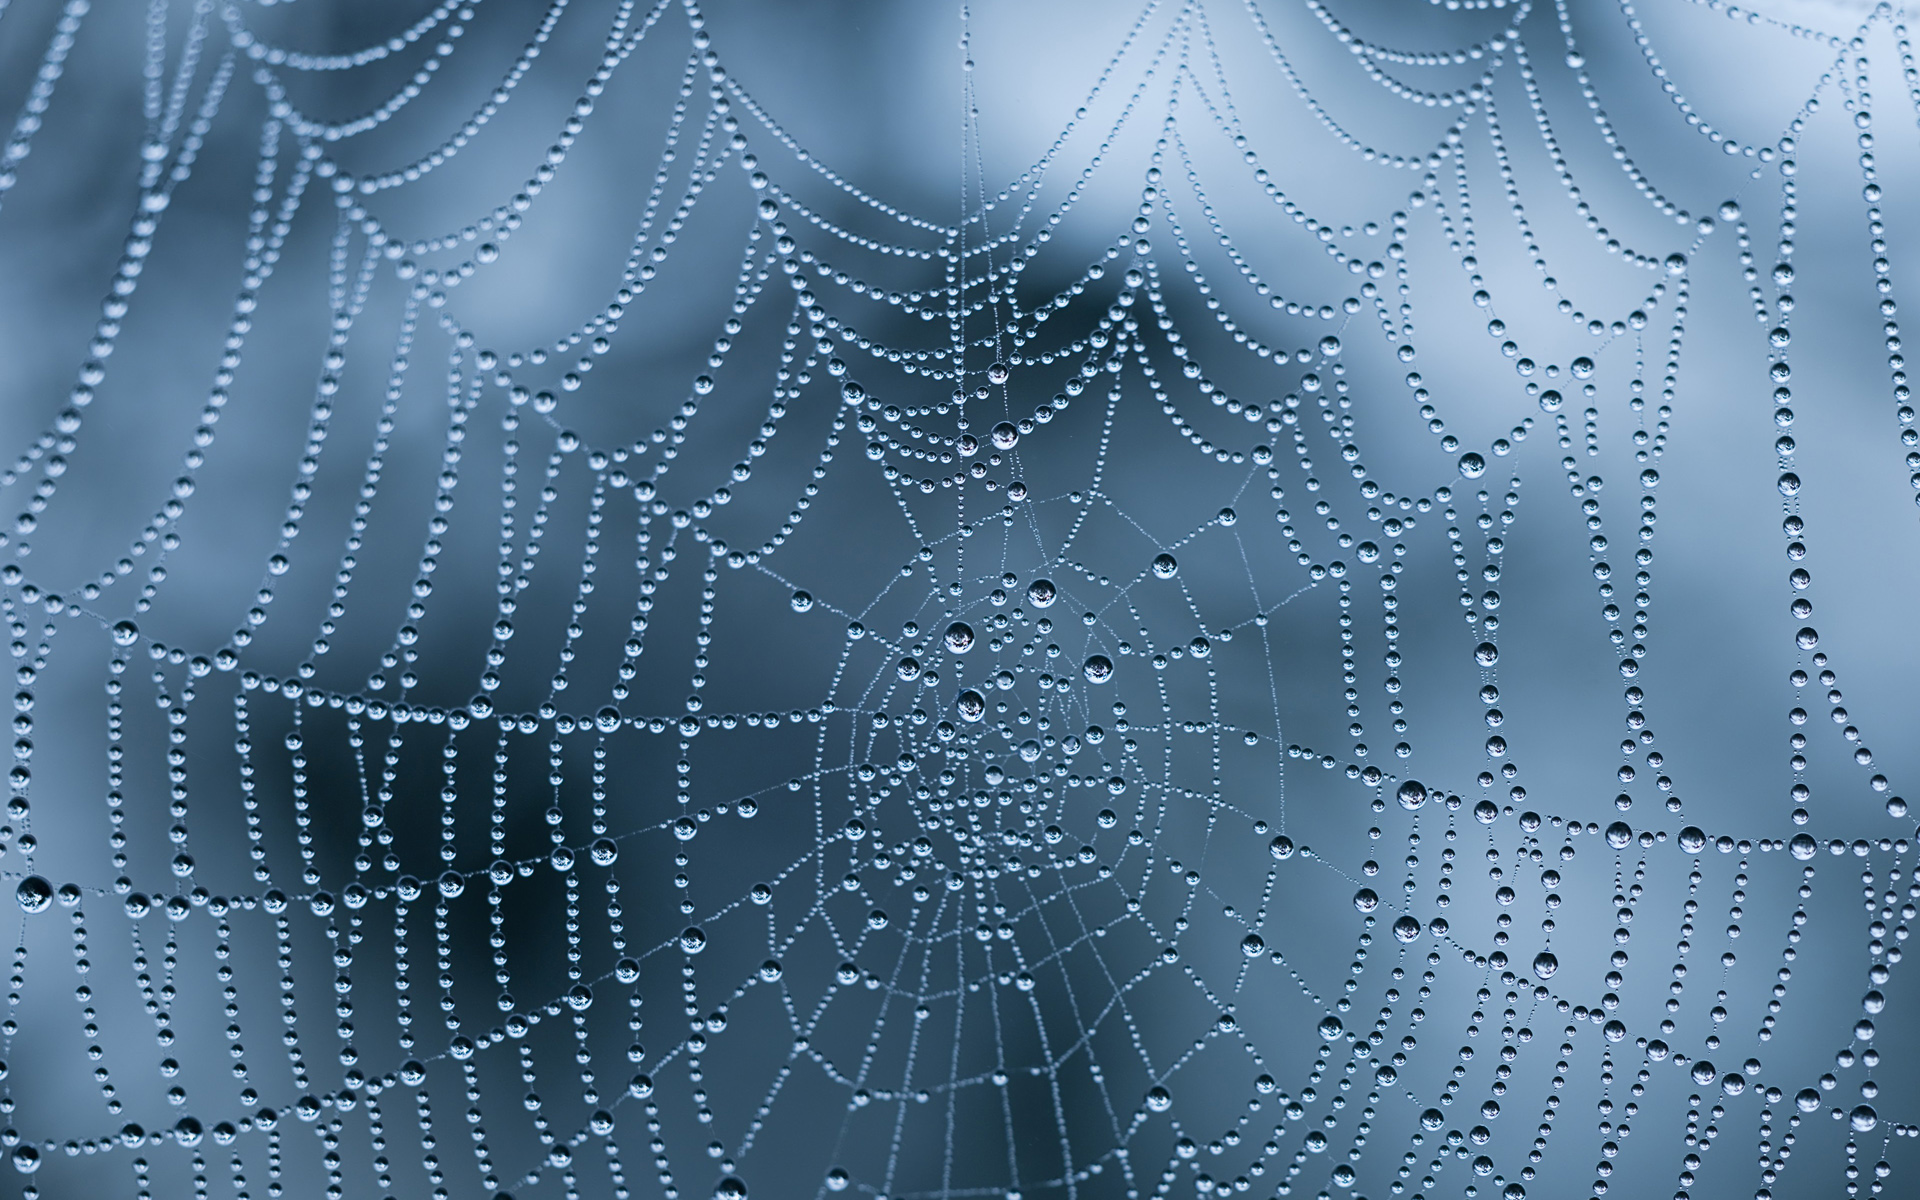 Spider Web Backgrounds - HD Wallpaper 